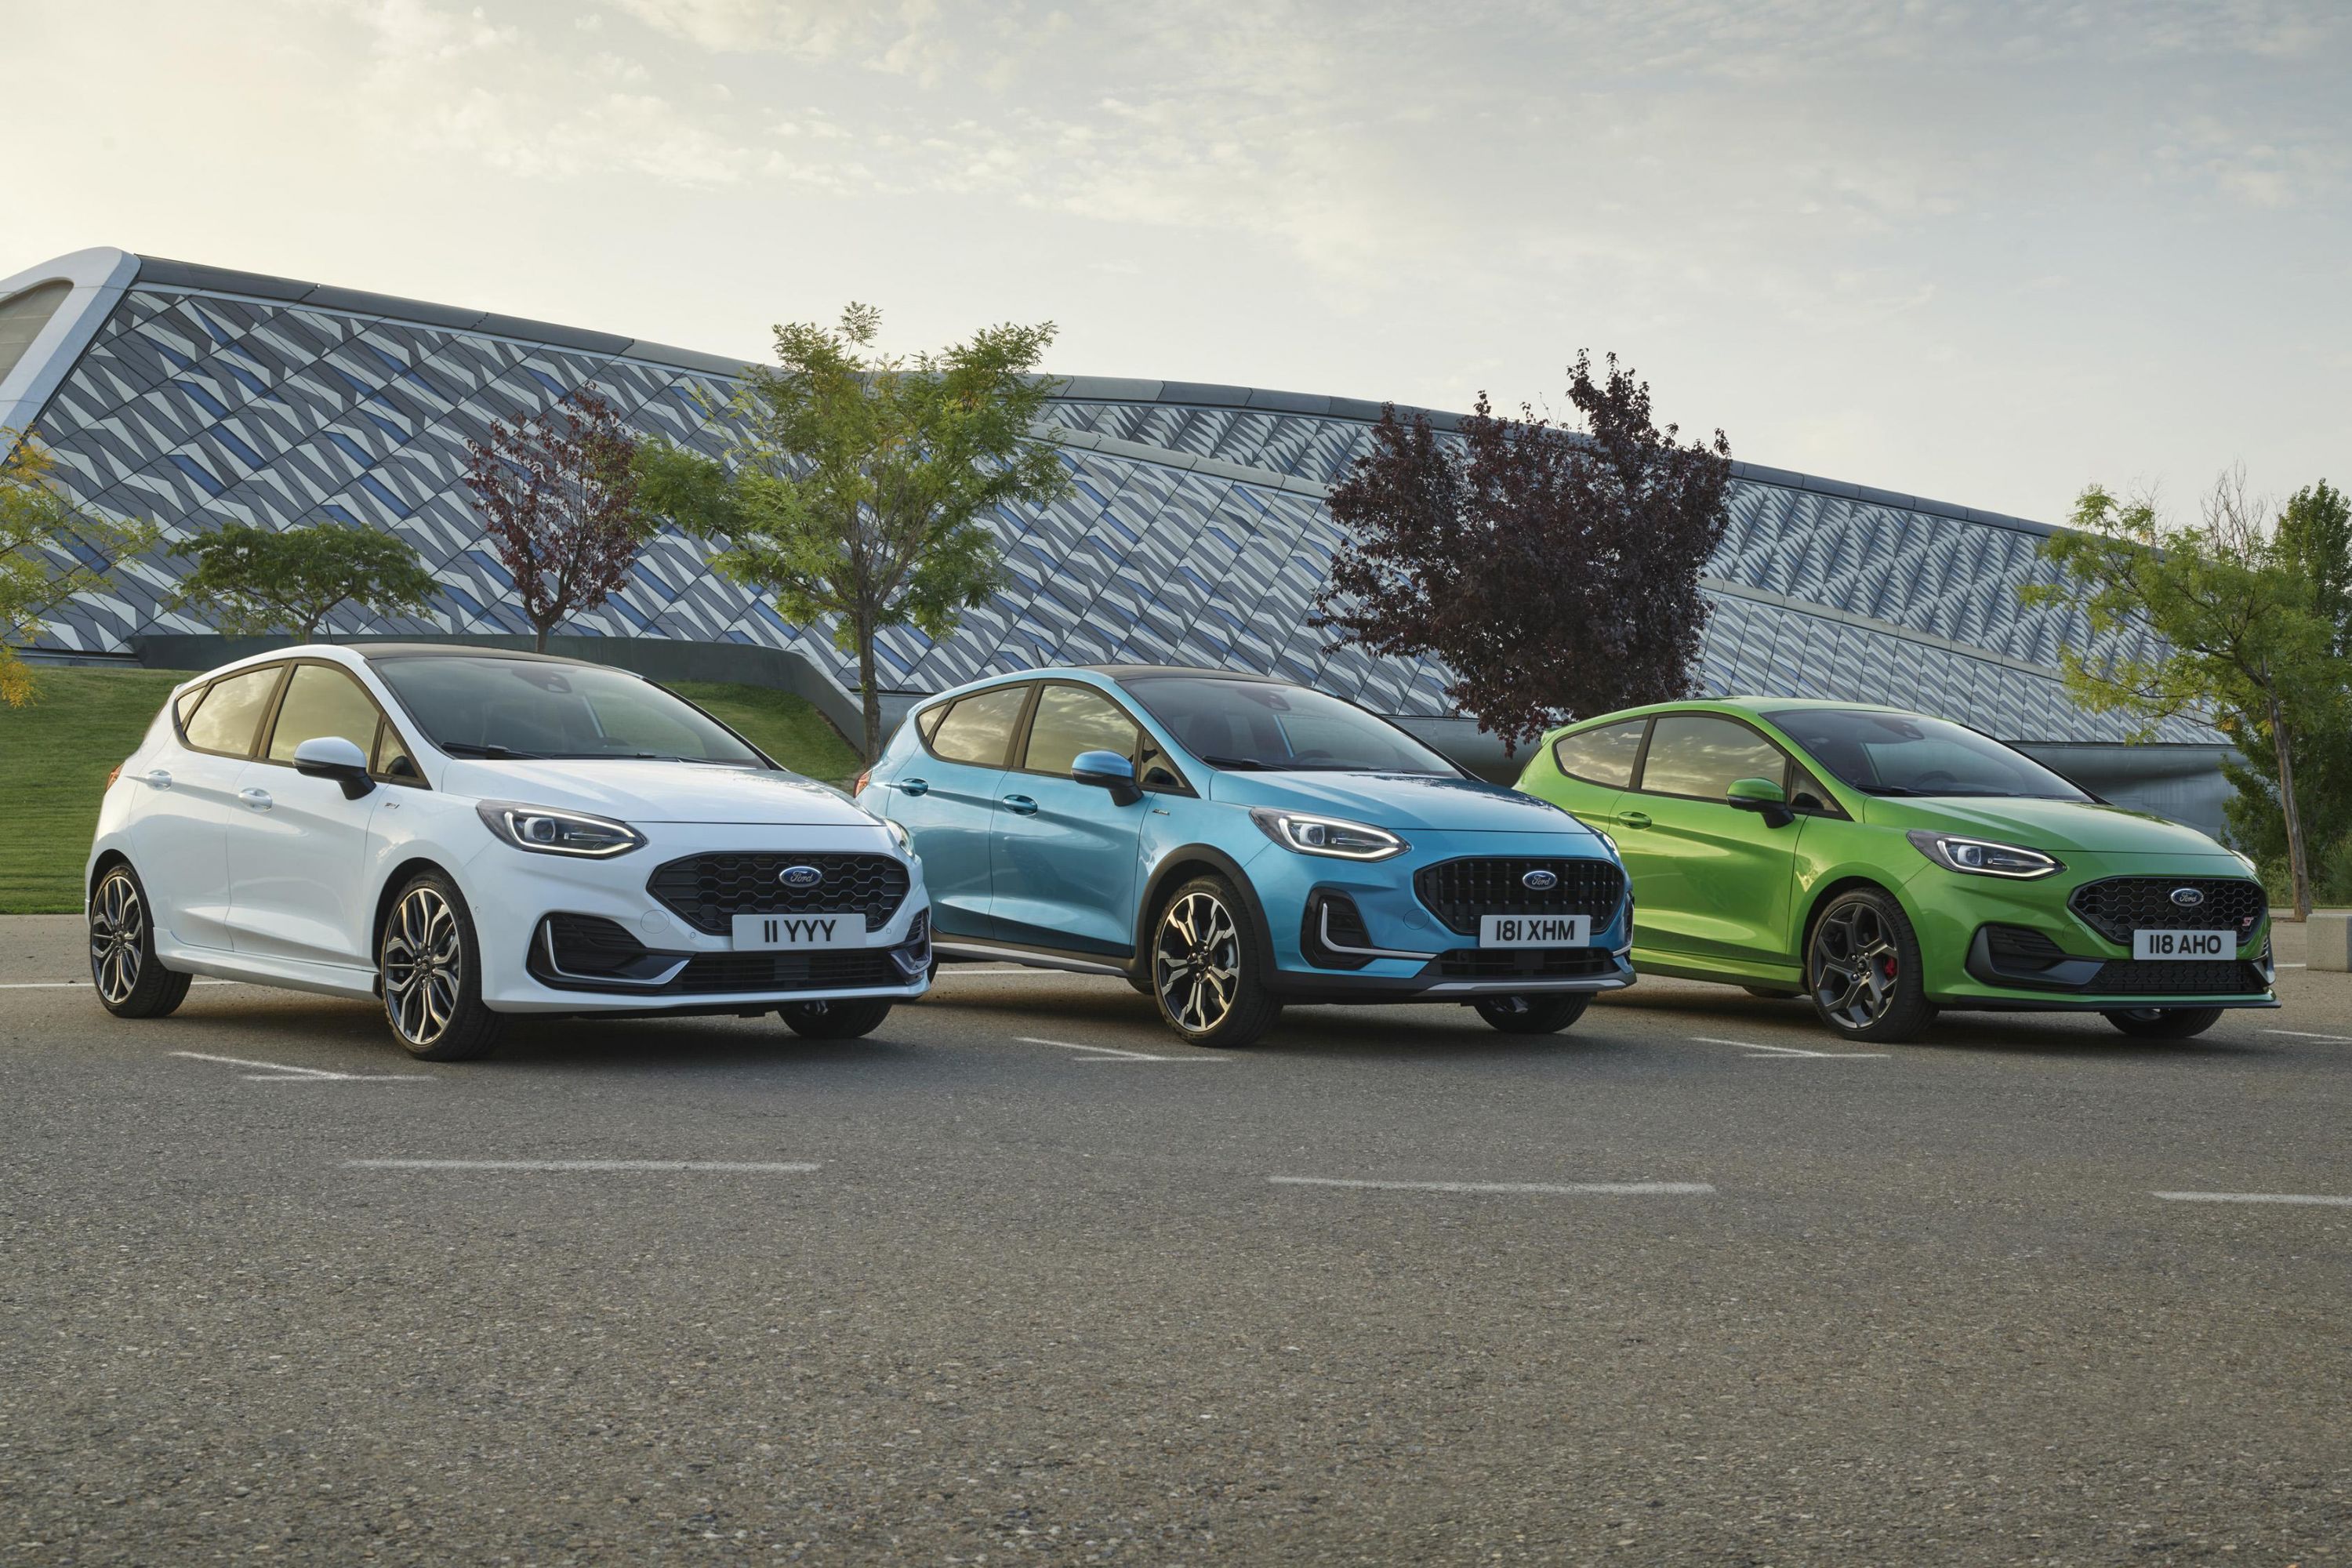 Production of the Ford Fiesta ends after nearly five decades